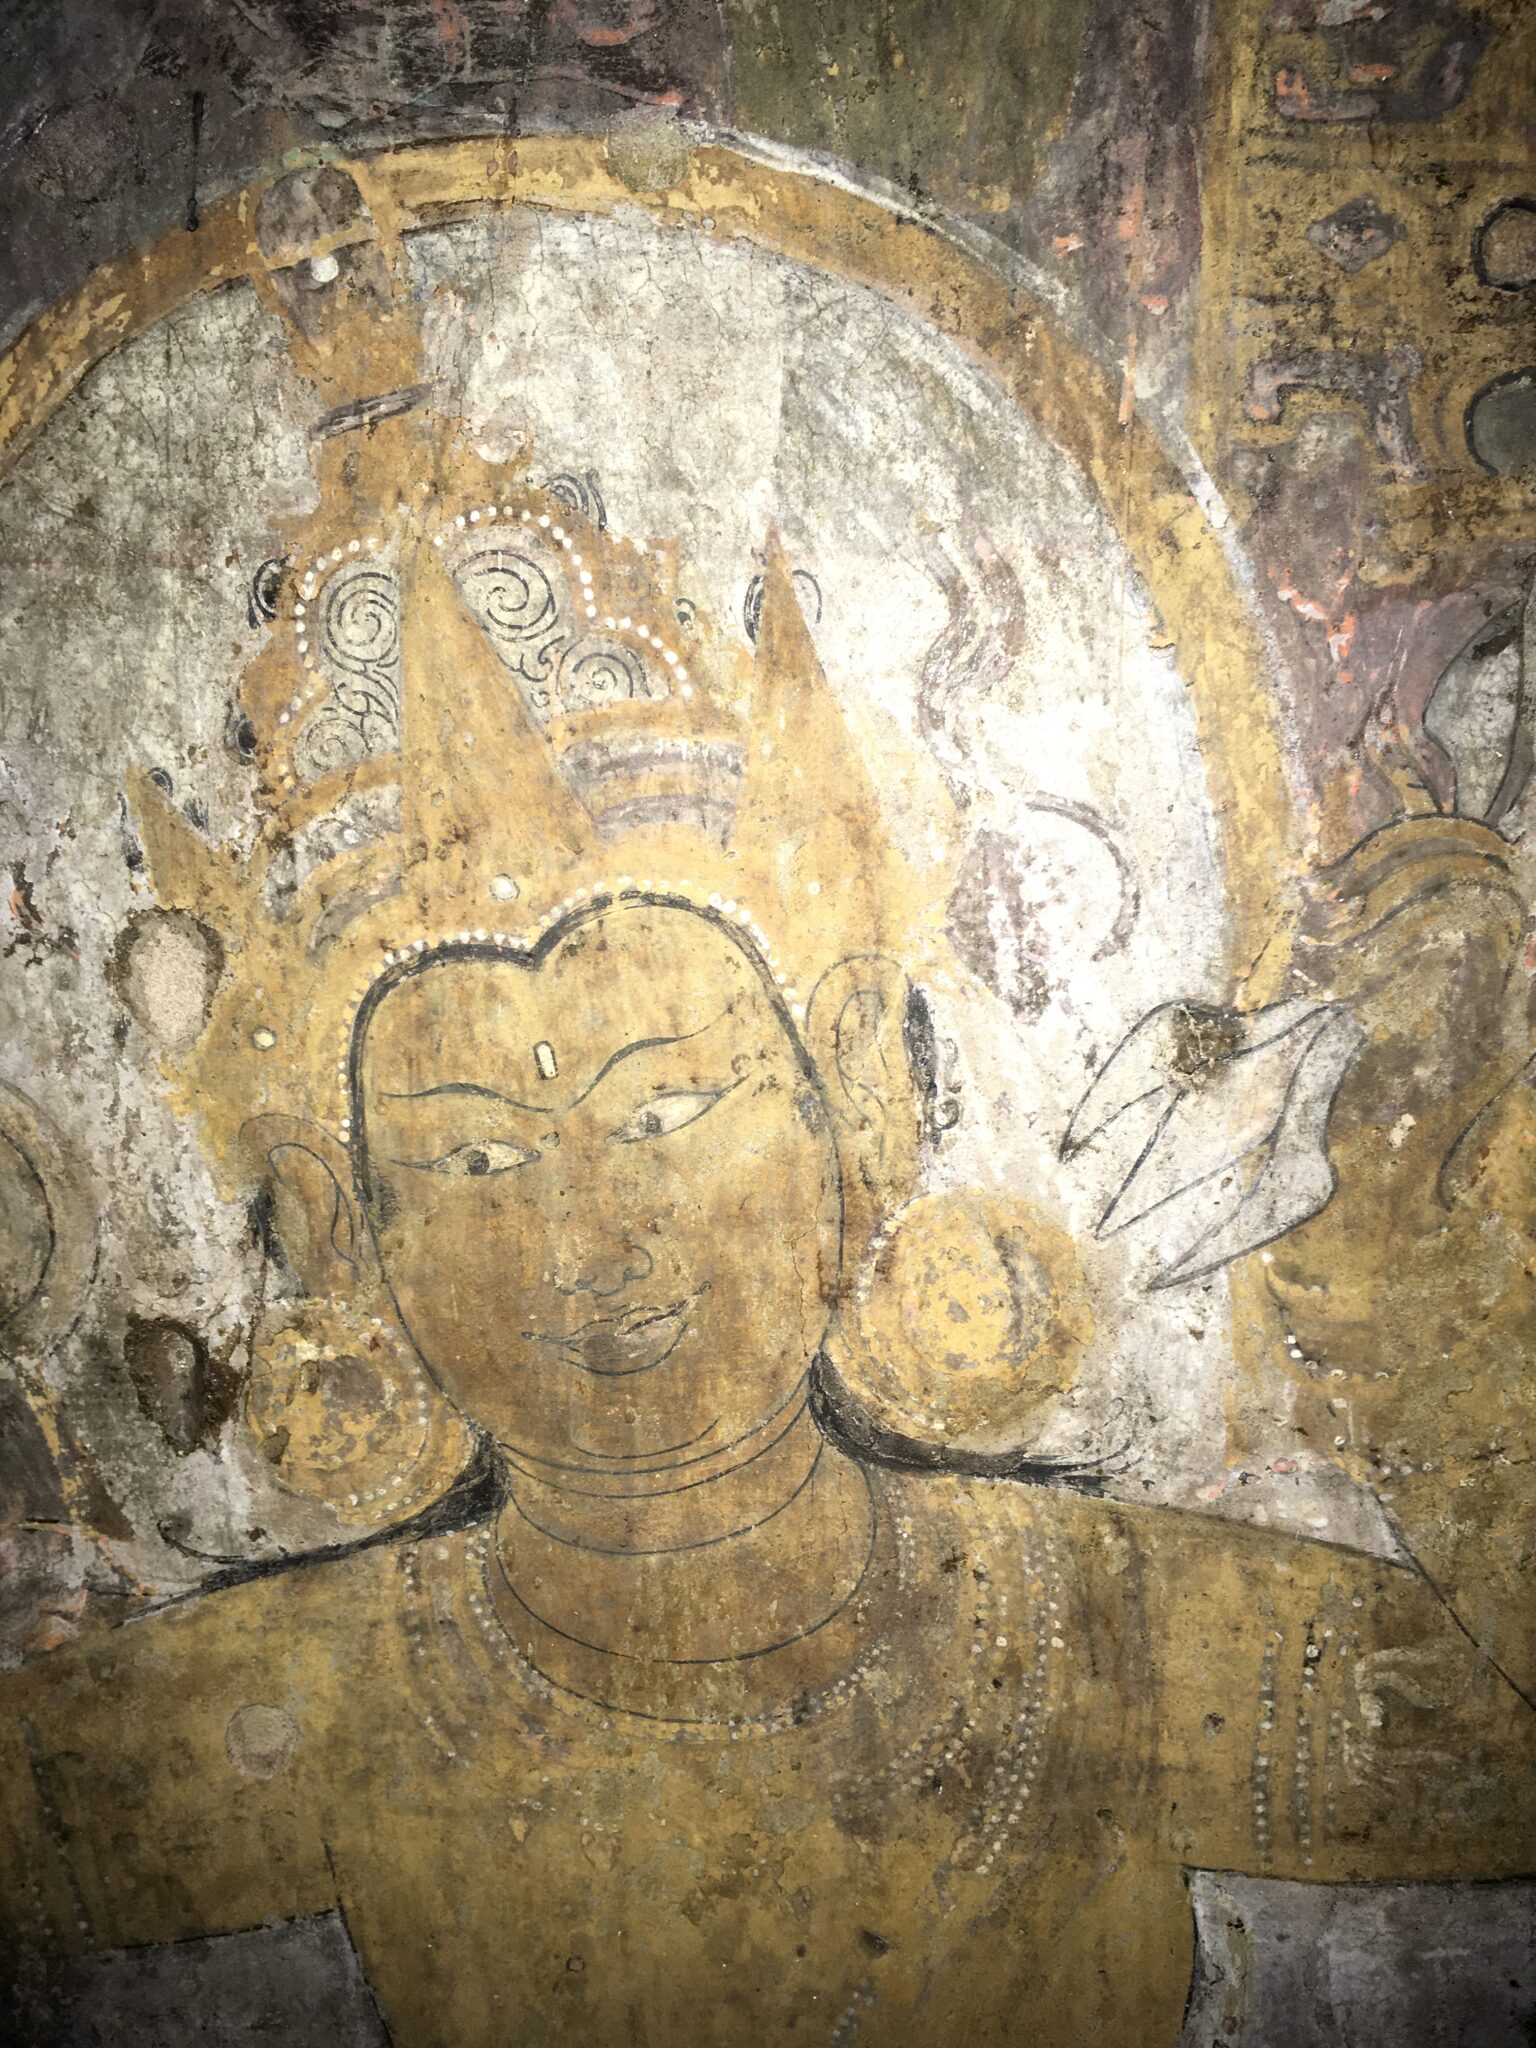 Head and shoulders of crowned Bodhisattva with yellow skin holding blossom; detail of faded mural